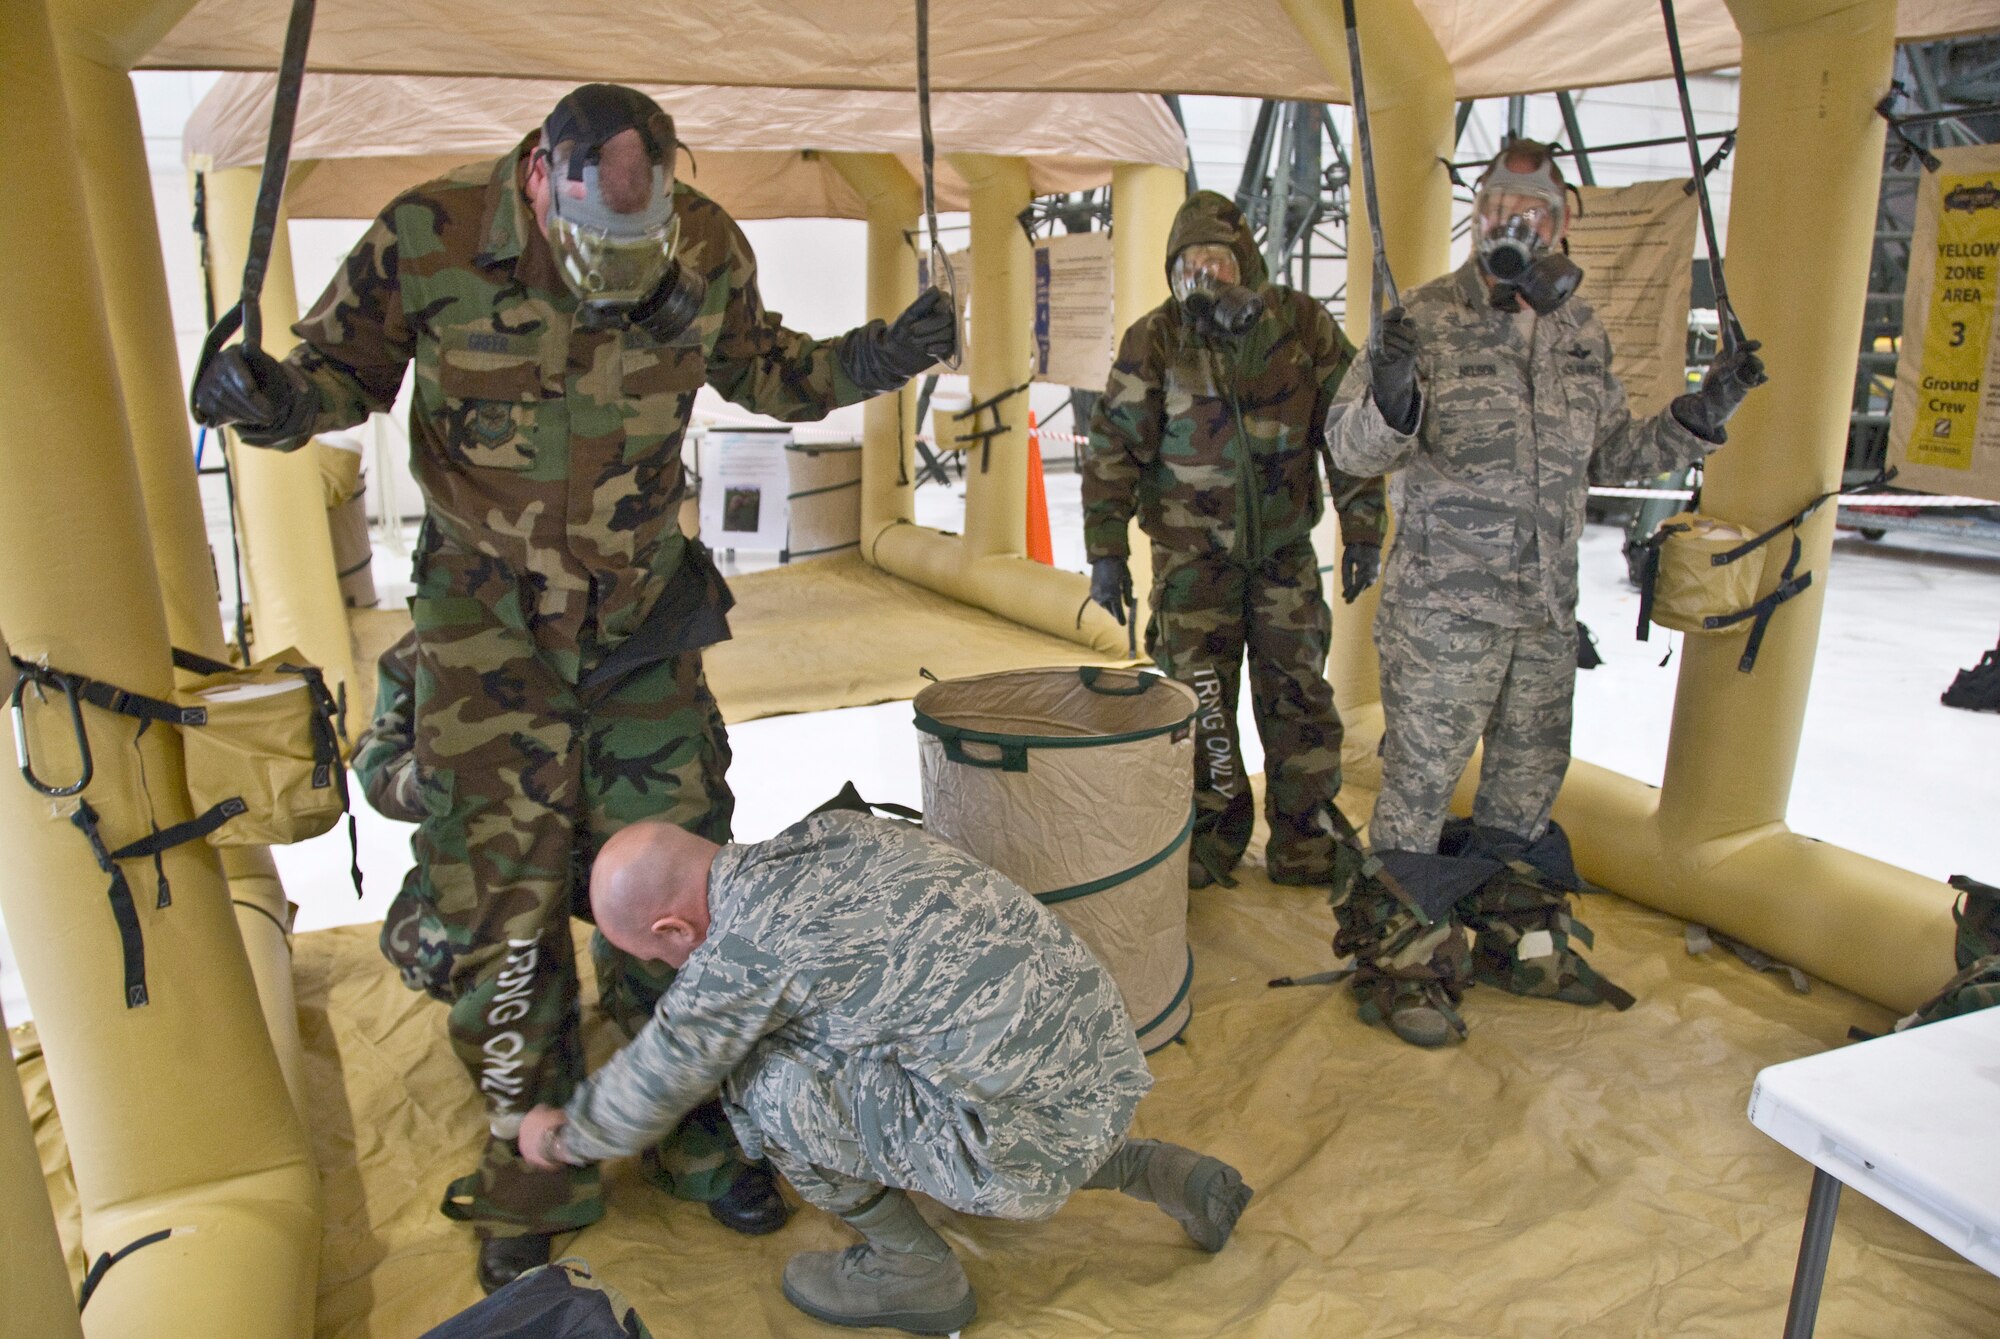 An instructor demonstrates the proper way to remove contaminated outergarments after exposure to simulated chemical agents during at ASTO exercise in the Main Hangar of the Kentucky Air National Guard Base in Louisville, Ky., on Dec. 12, 2009. (United States Air Force by Senior Airman Maxwell Rechel)
